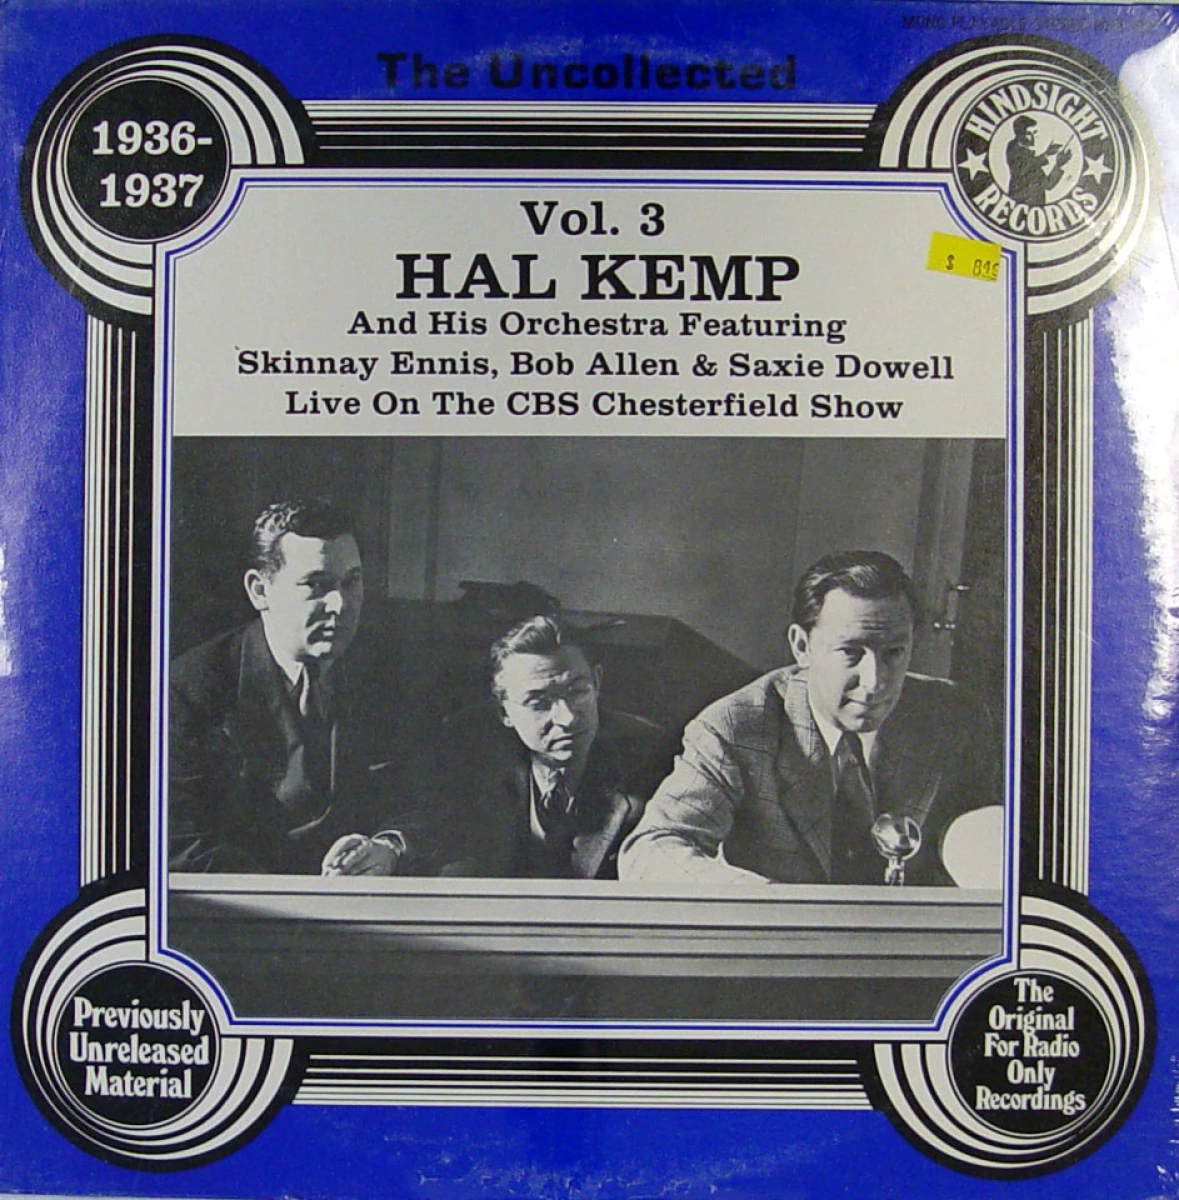 HAL KEMP & HIS ORCHESTRA / SPEAK YOUR HEART/TAKE A TIP FROM THE TULIP (HMV E.A.2114)　SP盤 　78rpm 　Jazz 《豪版》